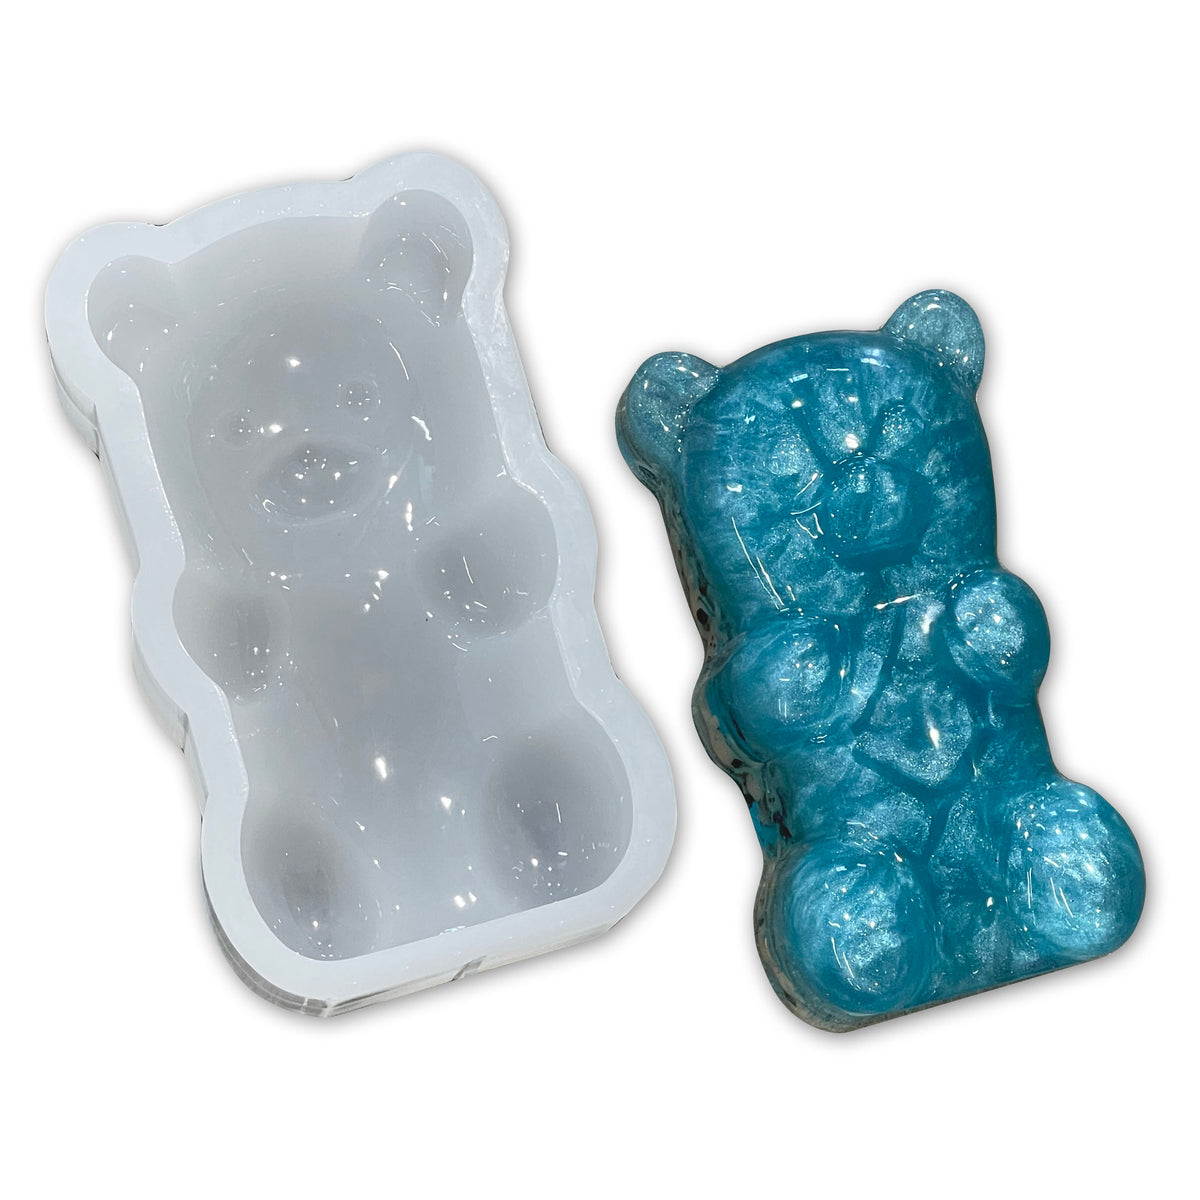 Homemade silicone gummy bear molds China wholesale - HB Silicone